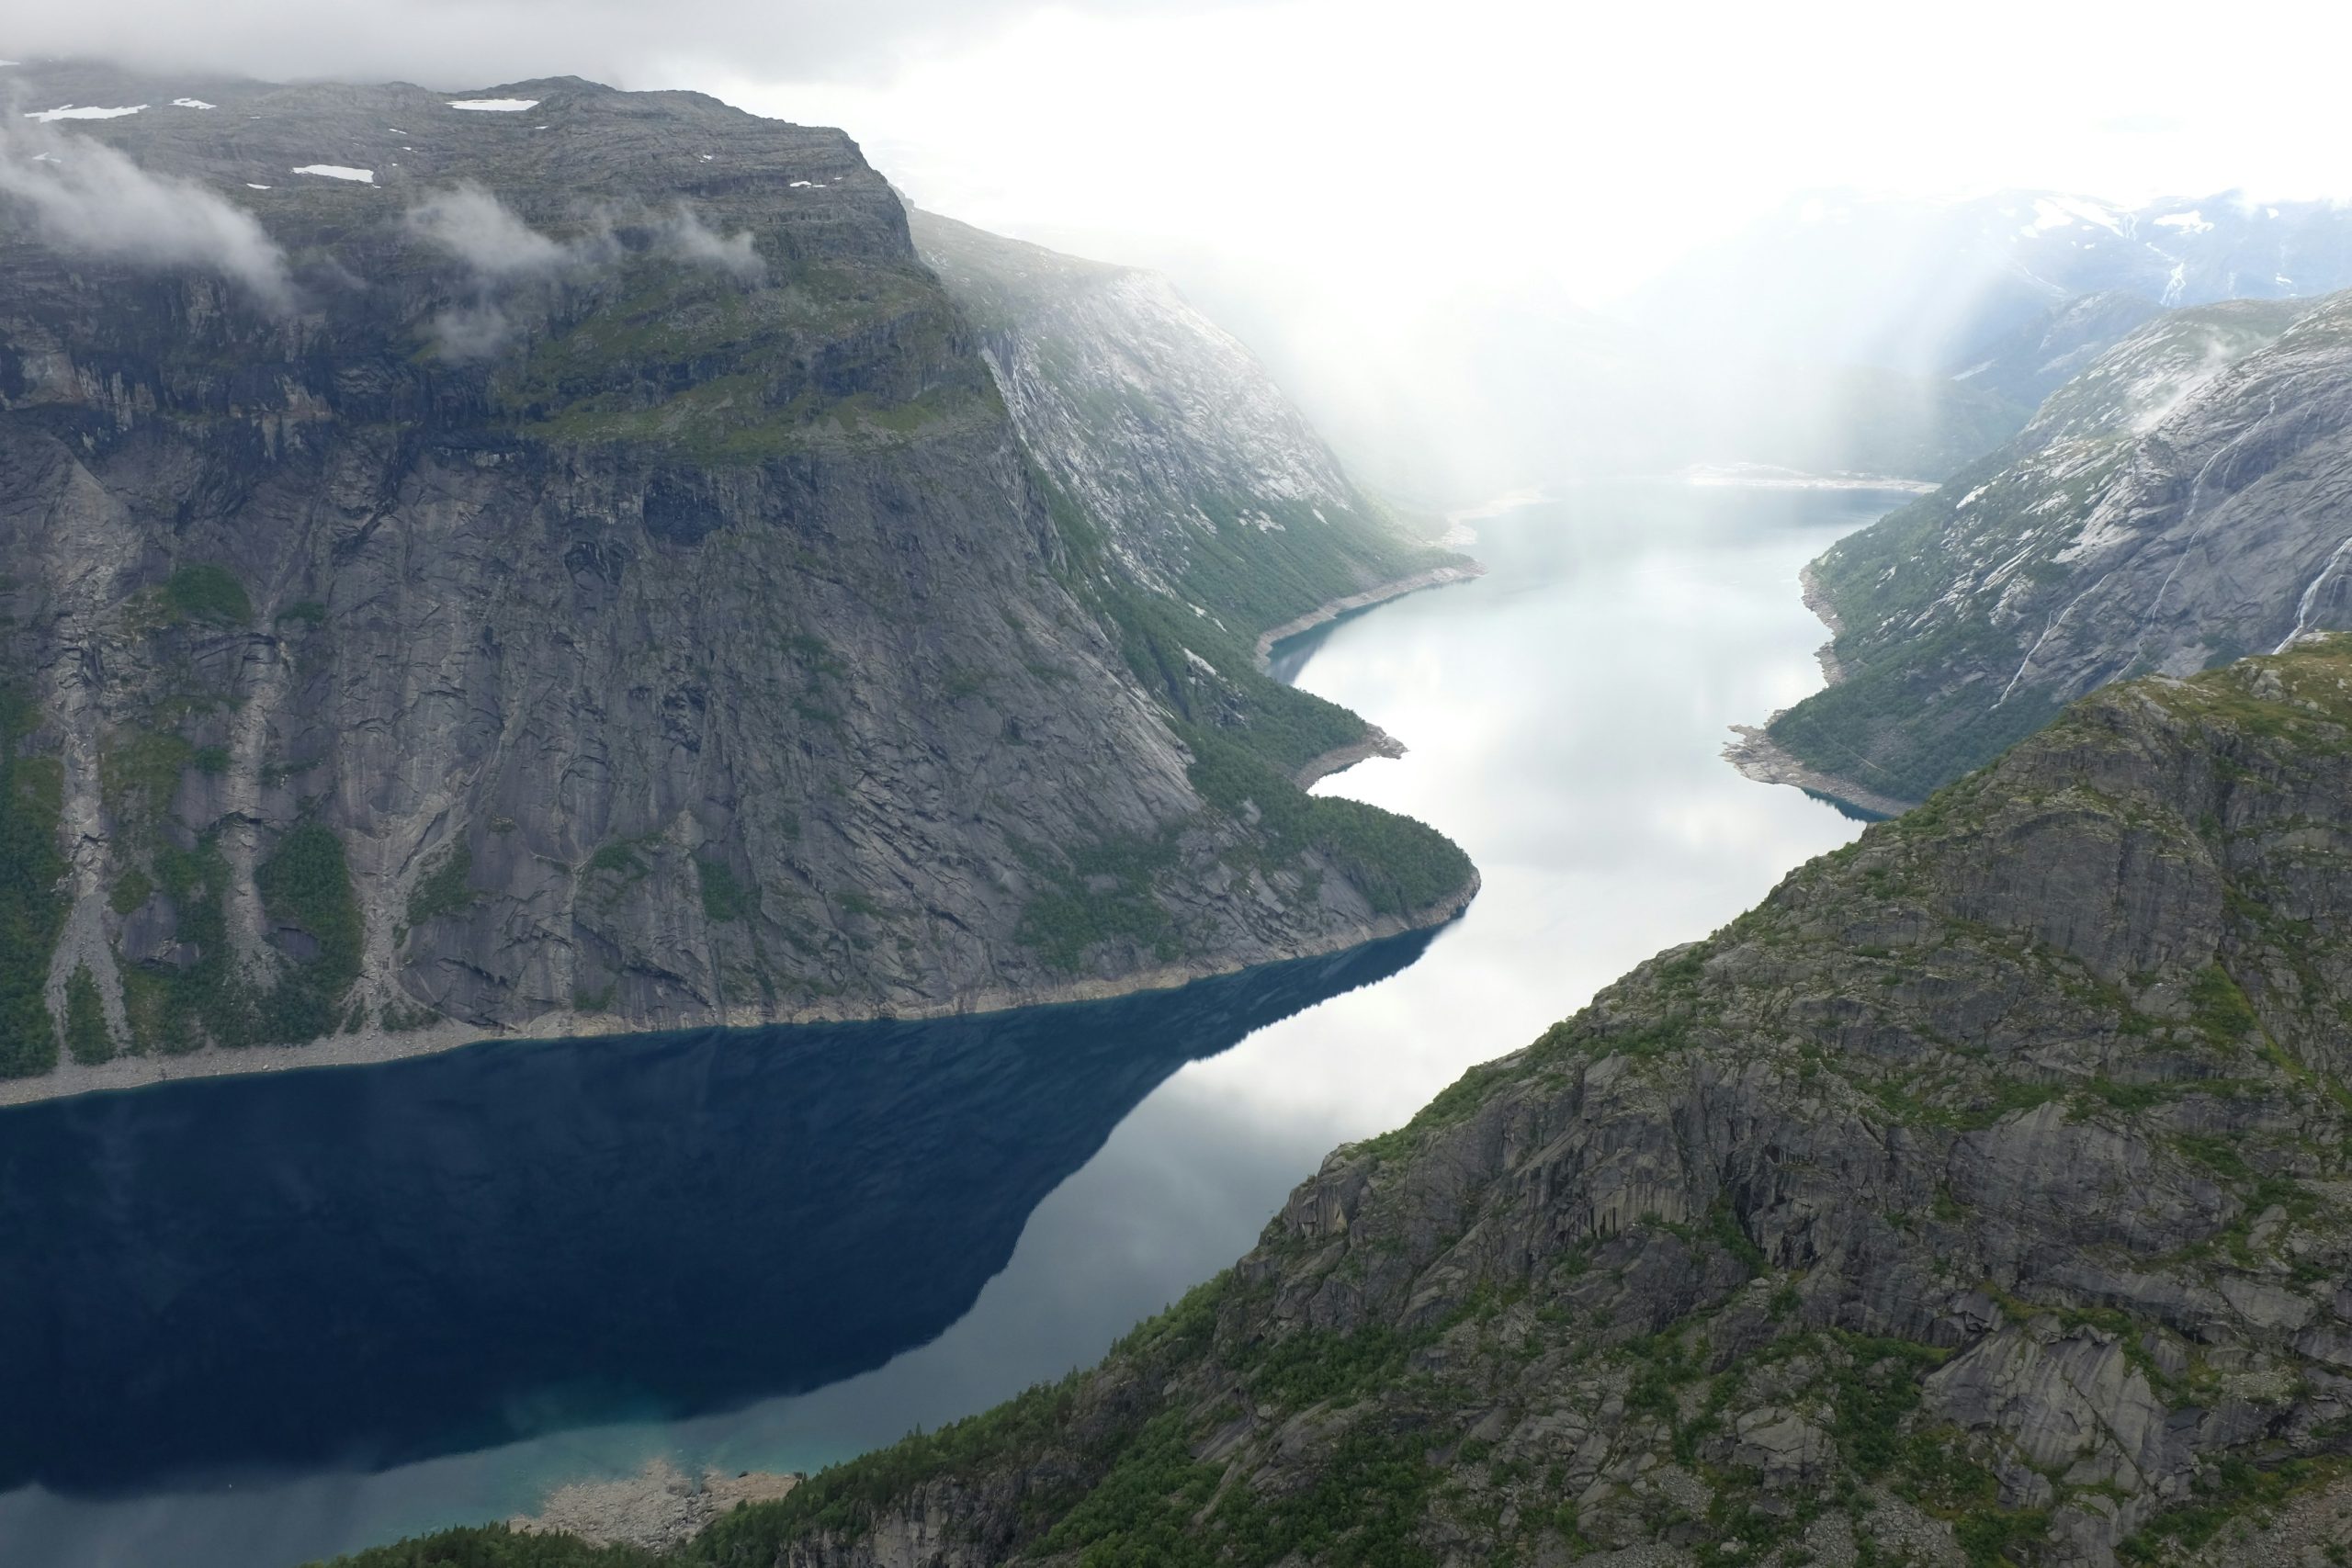 explore the breathtaking beauty of norway fjords - a must-see natural wonder for any adventure seeker.